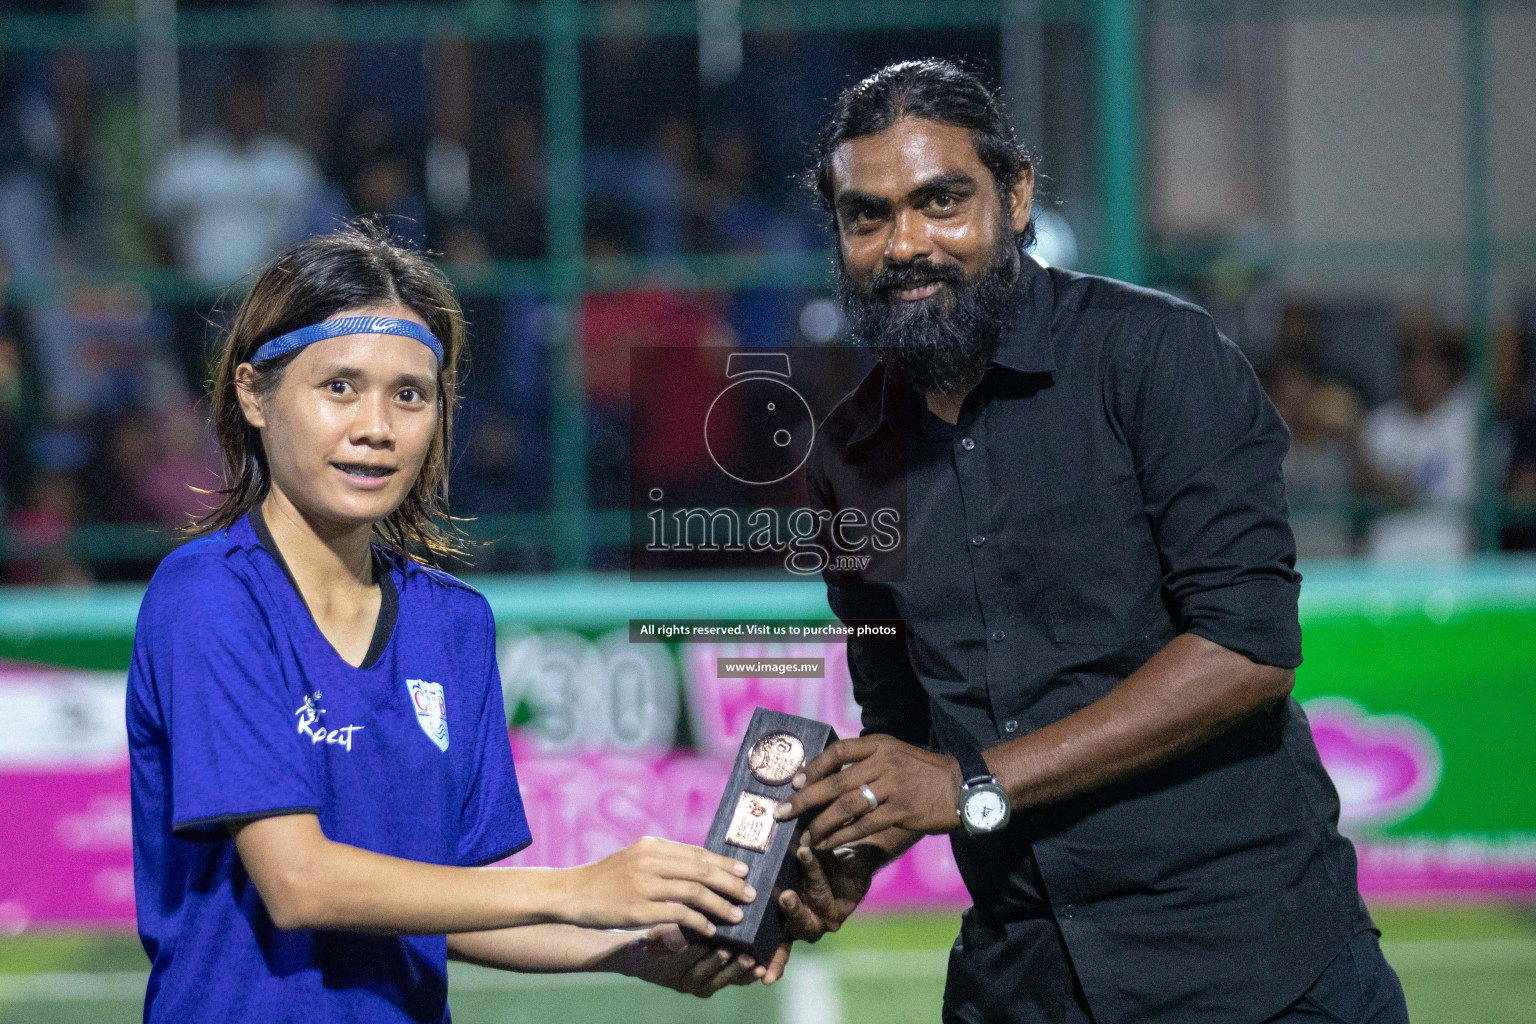 Police Club vs Club Immigration in the semi finals of 18/30 Women's Futsal Fiesta 2019 on 27th April 2019, held in Hulhumale Photos: Suadh Abdul Sattar / images.mv